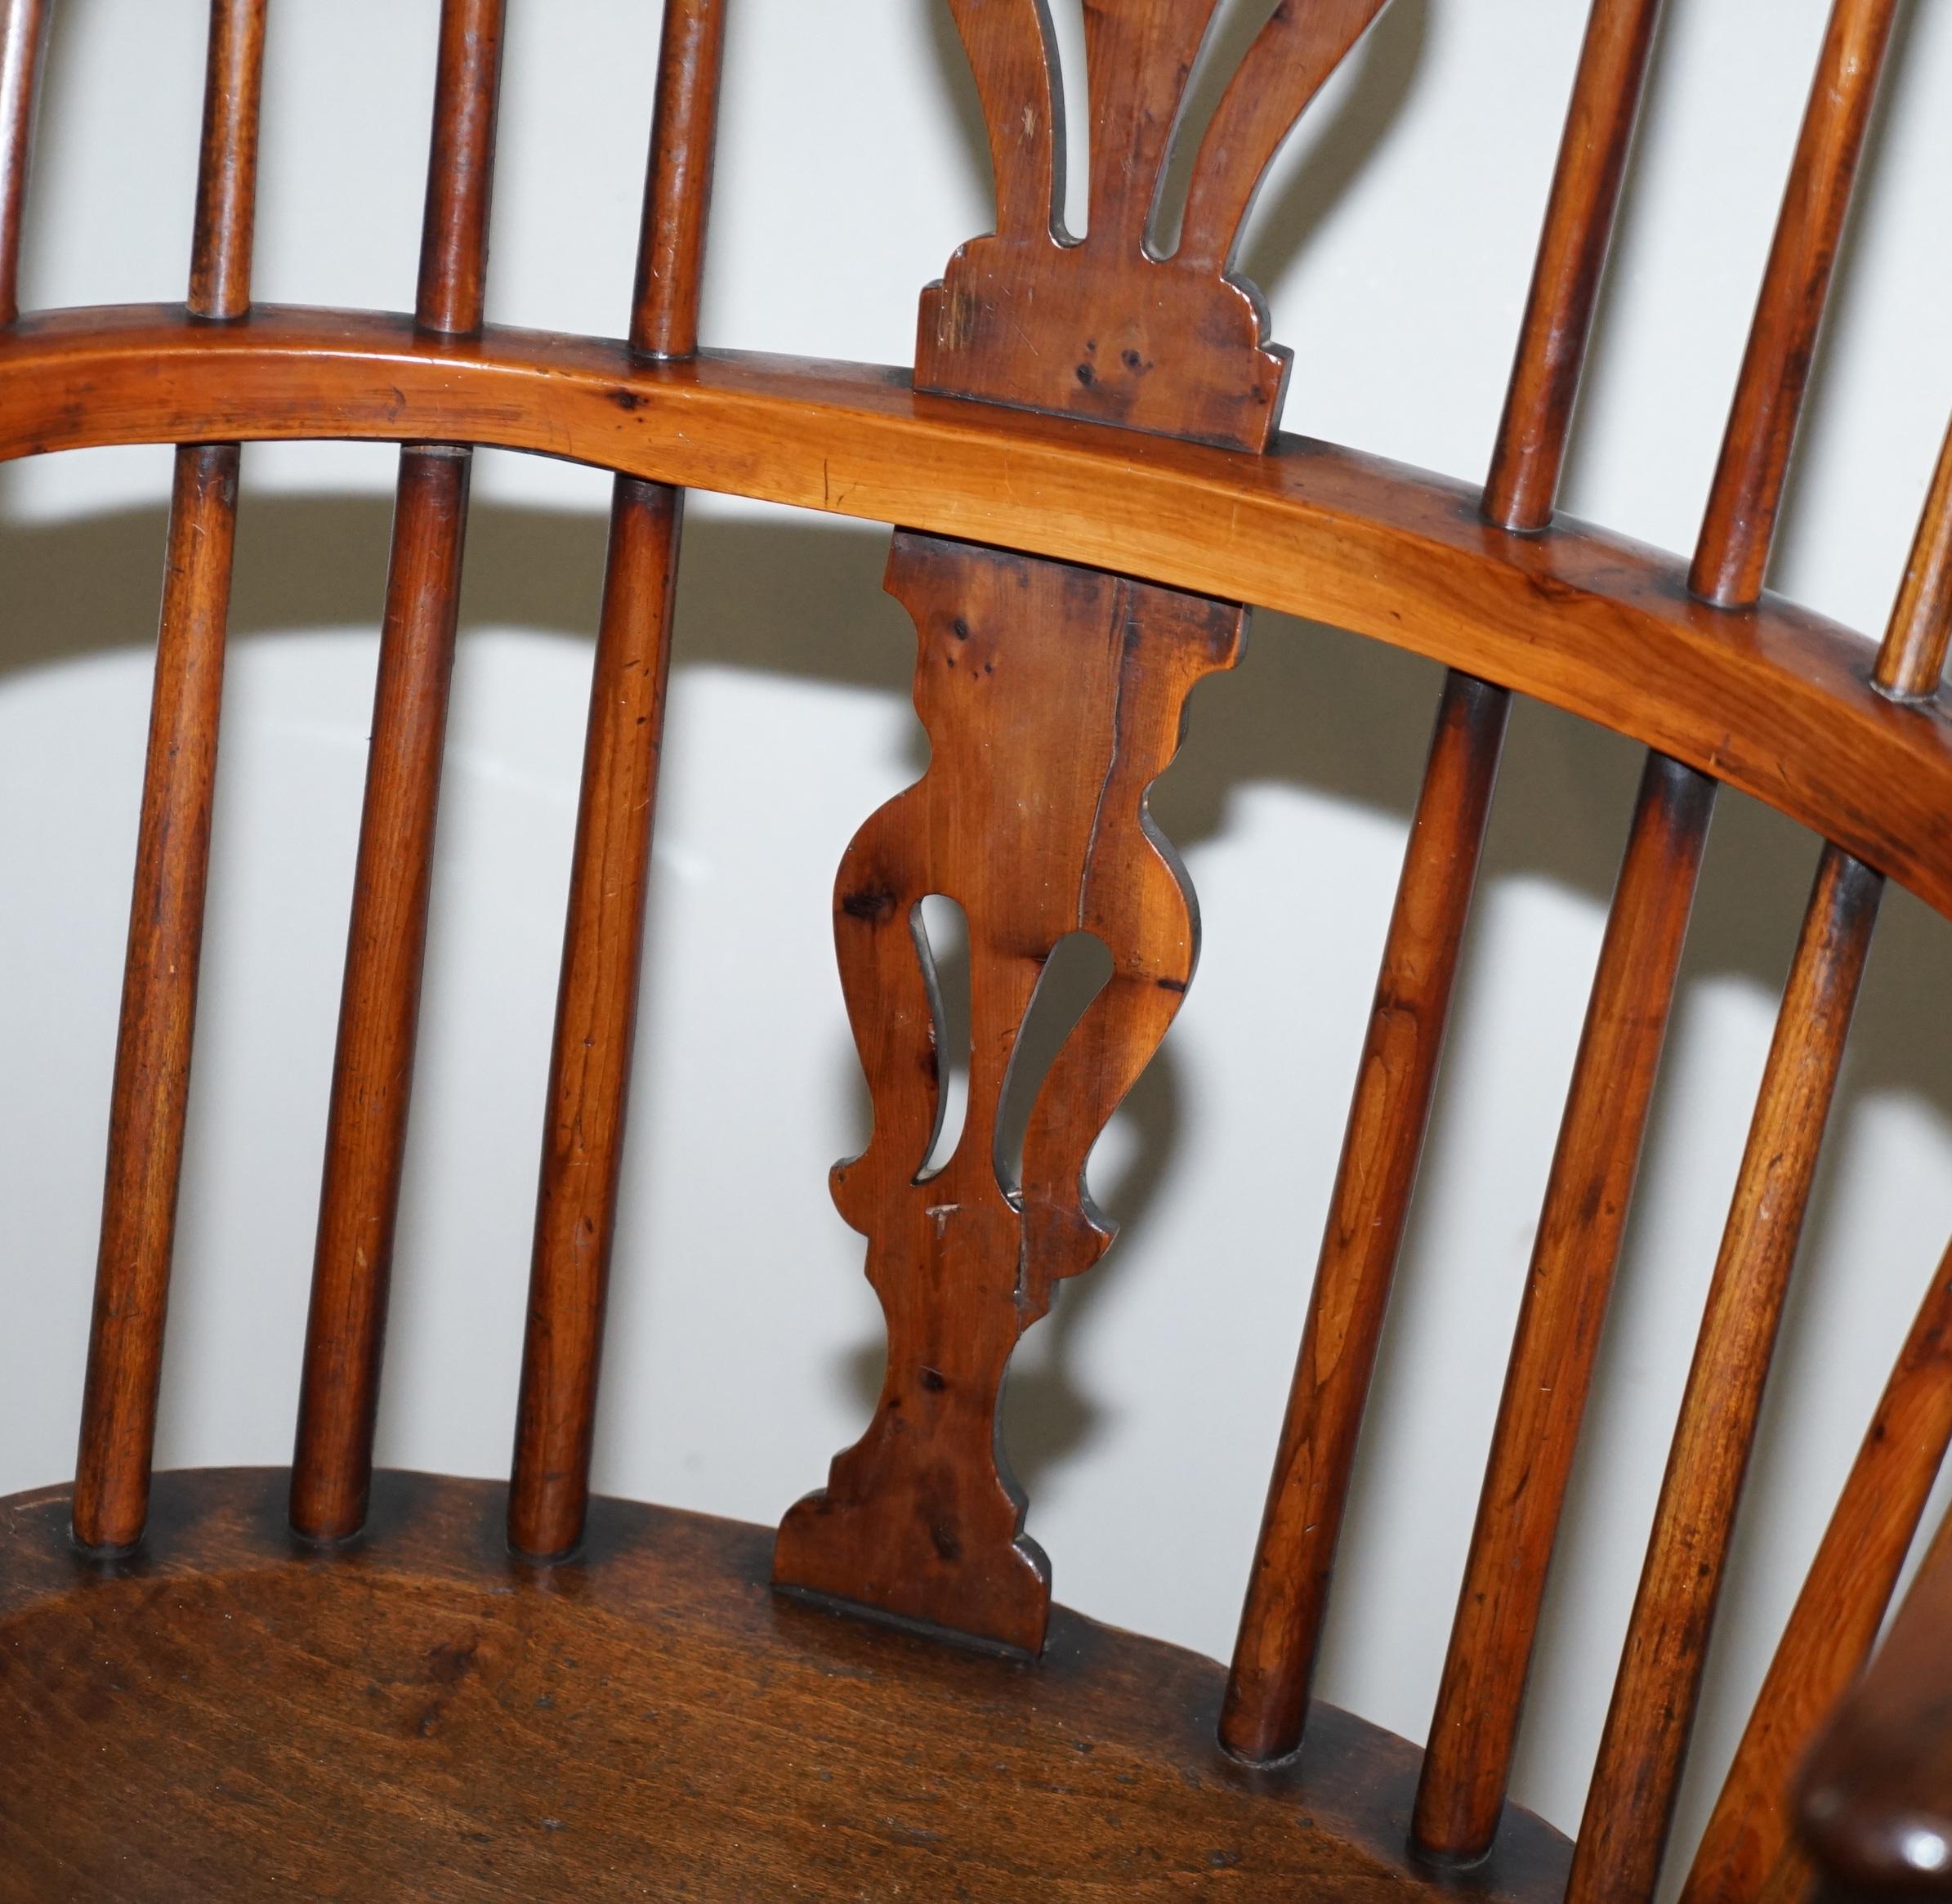 Hand-Crafted 1 of 6 Burr Yew Wood Windsor Armchairs circa 1860 English Countryhouse Furniture For Sale